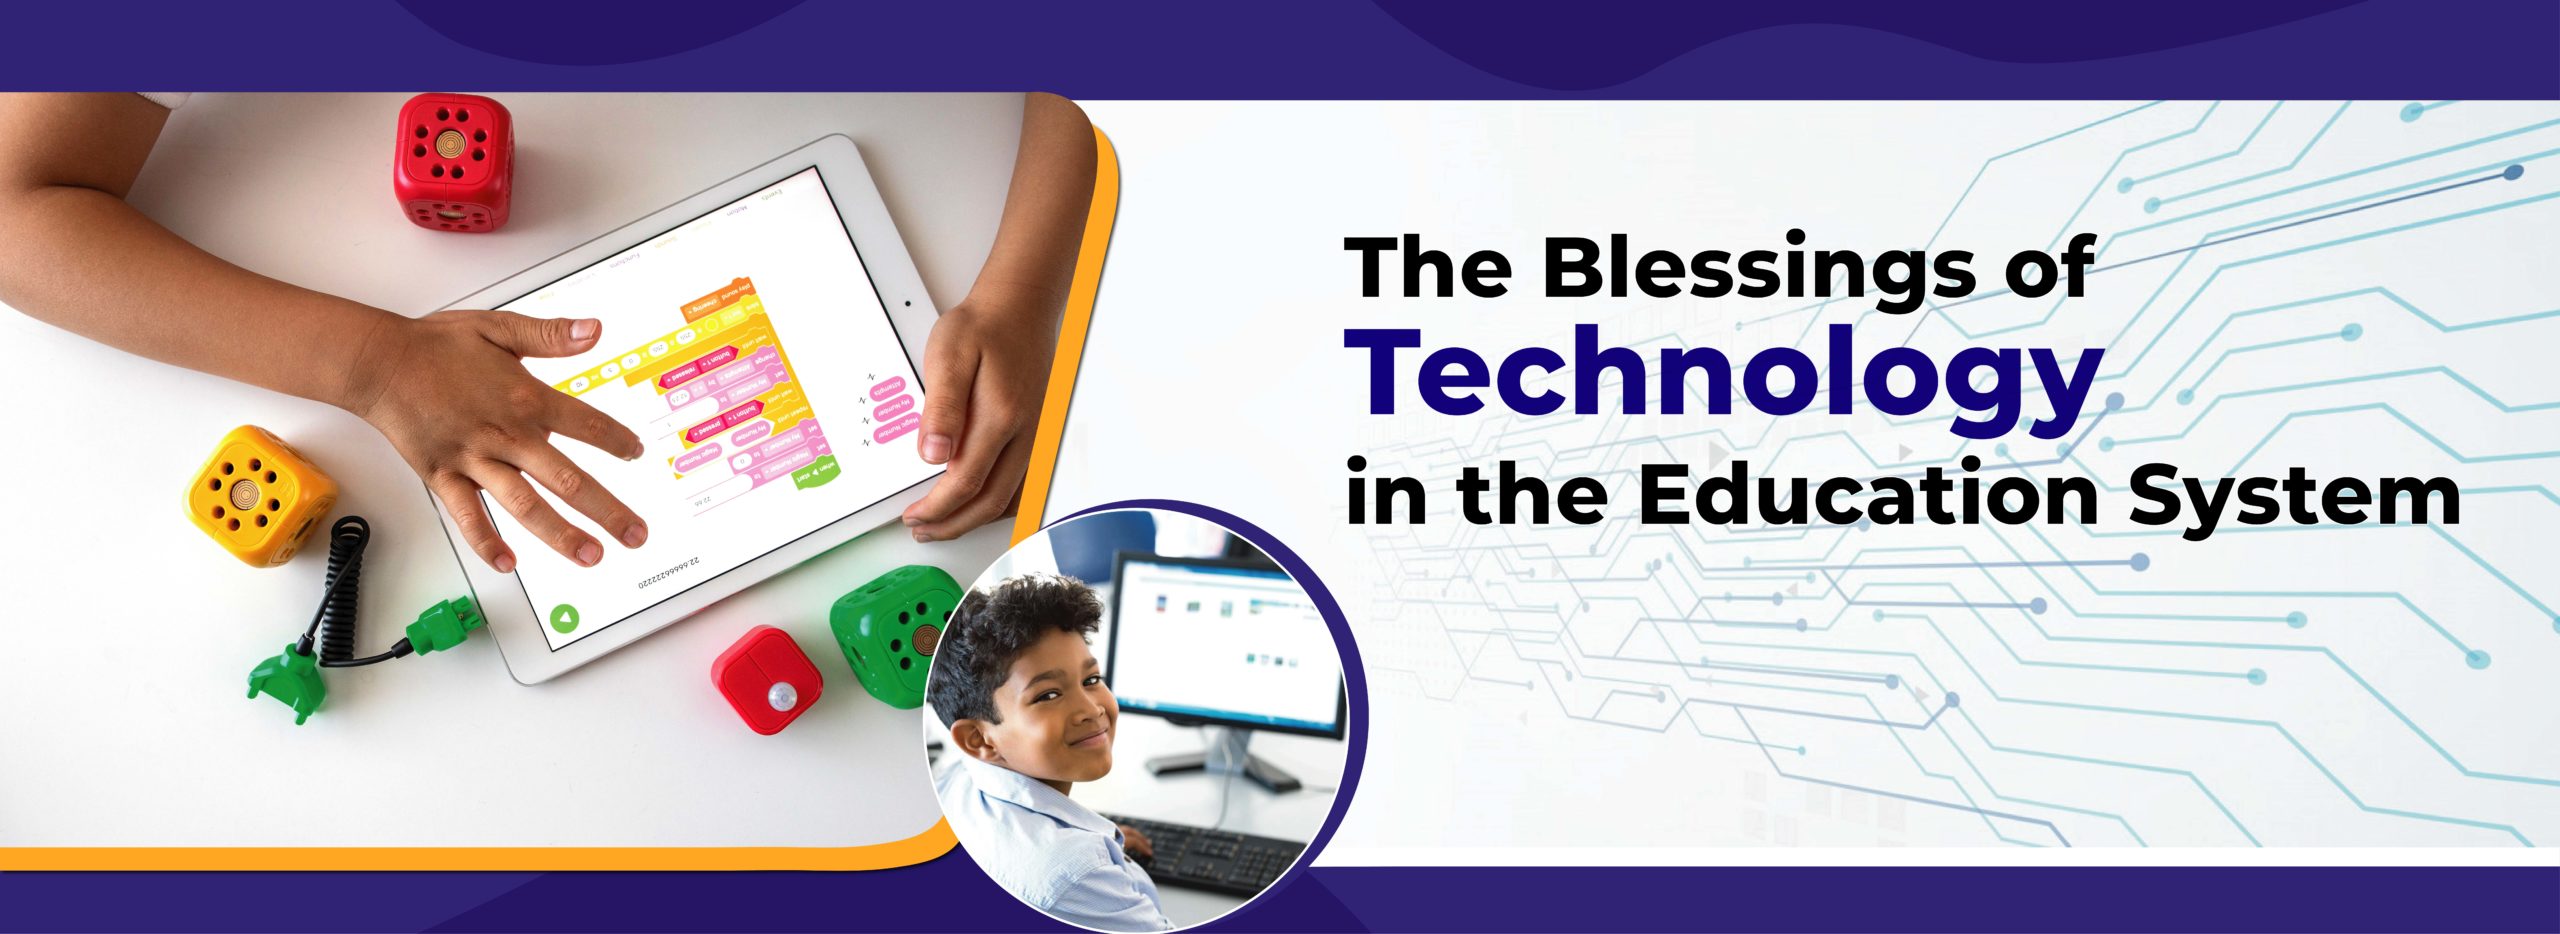 benefits of technology in education